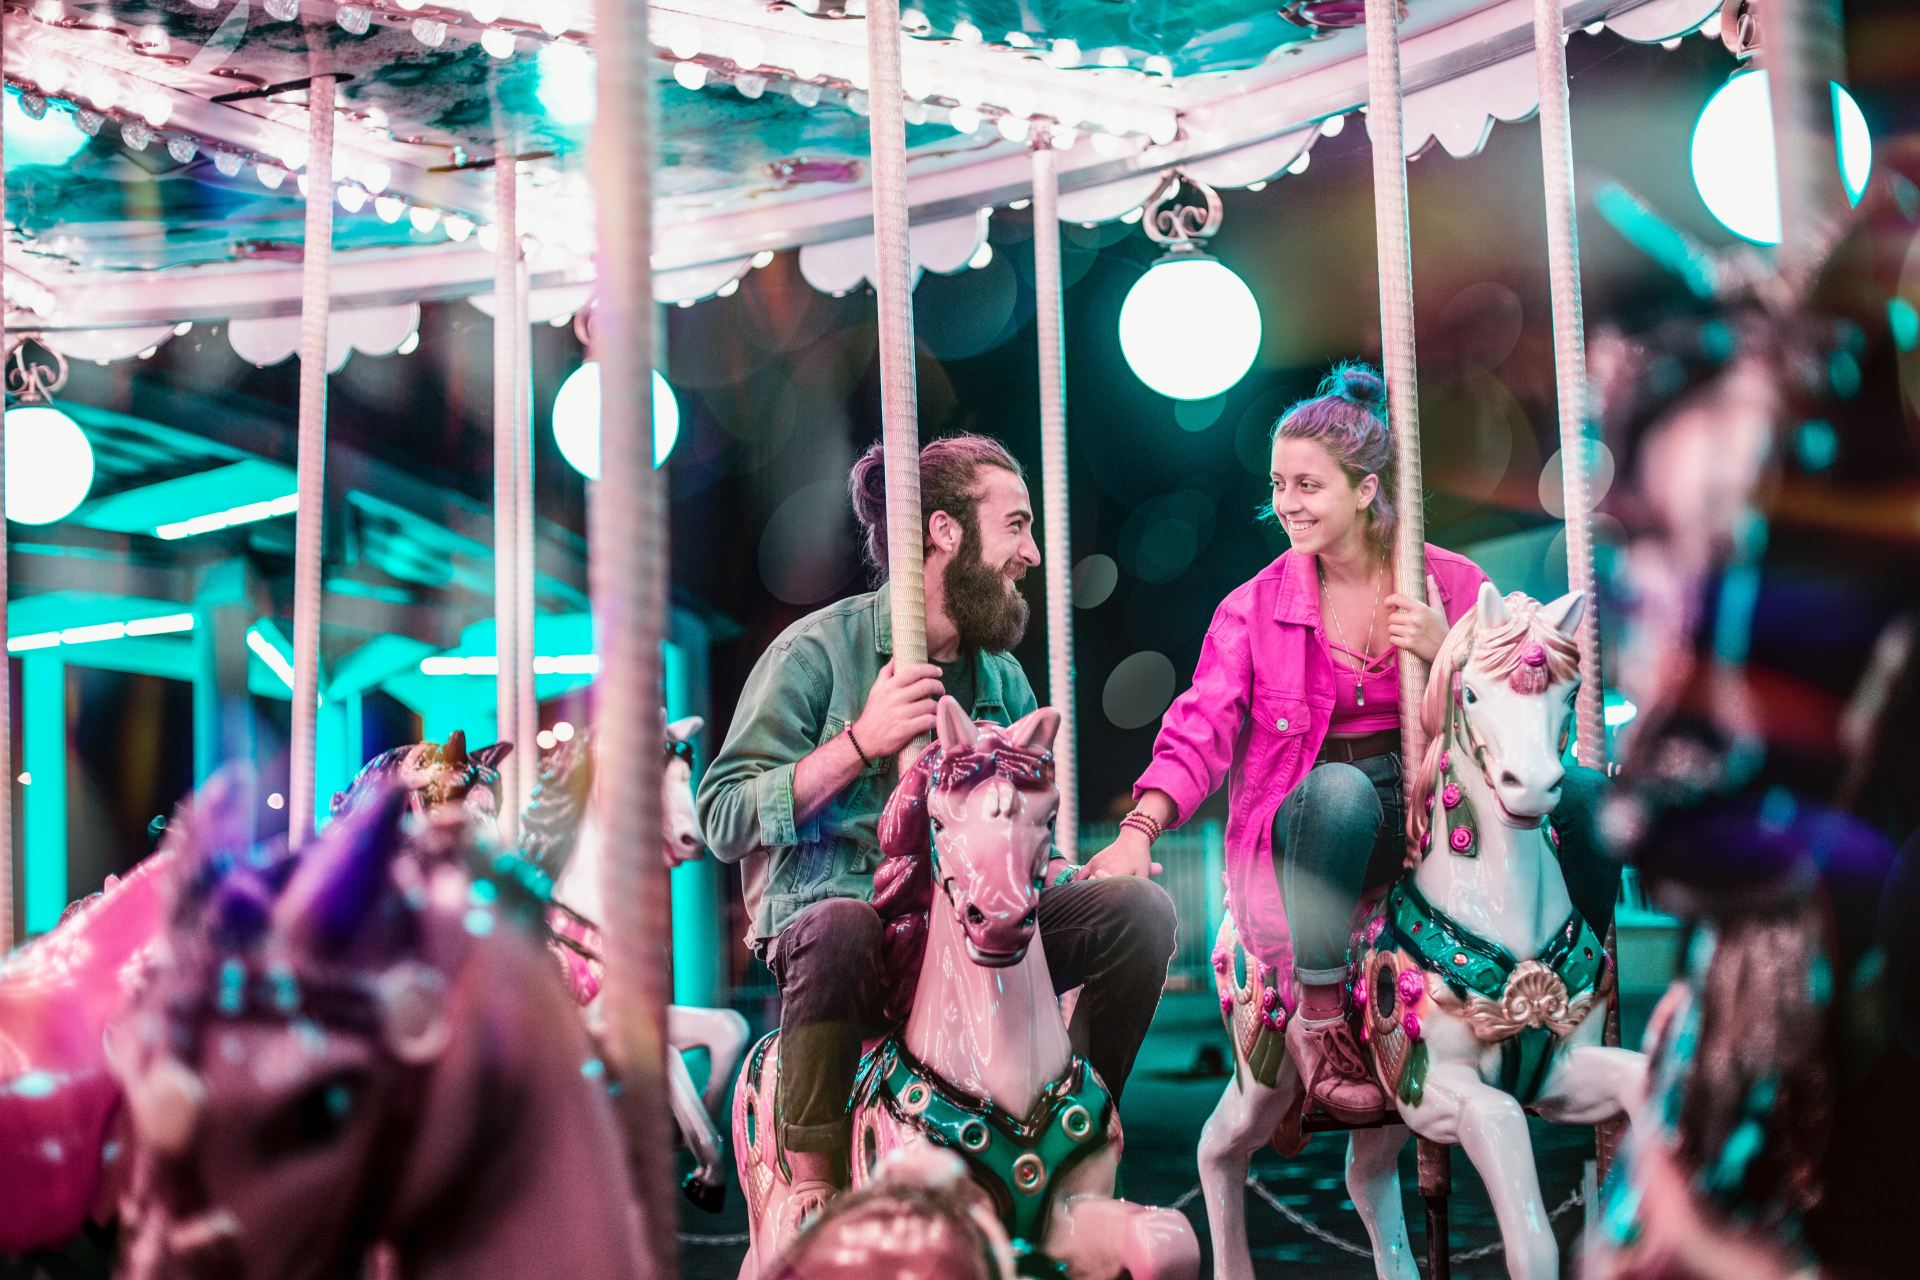 man and woman riding a carousel